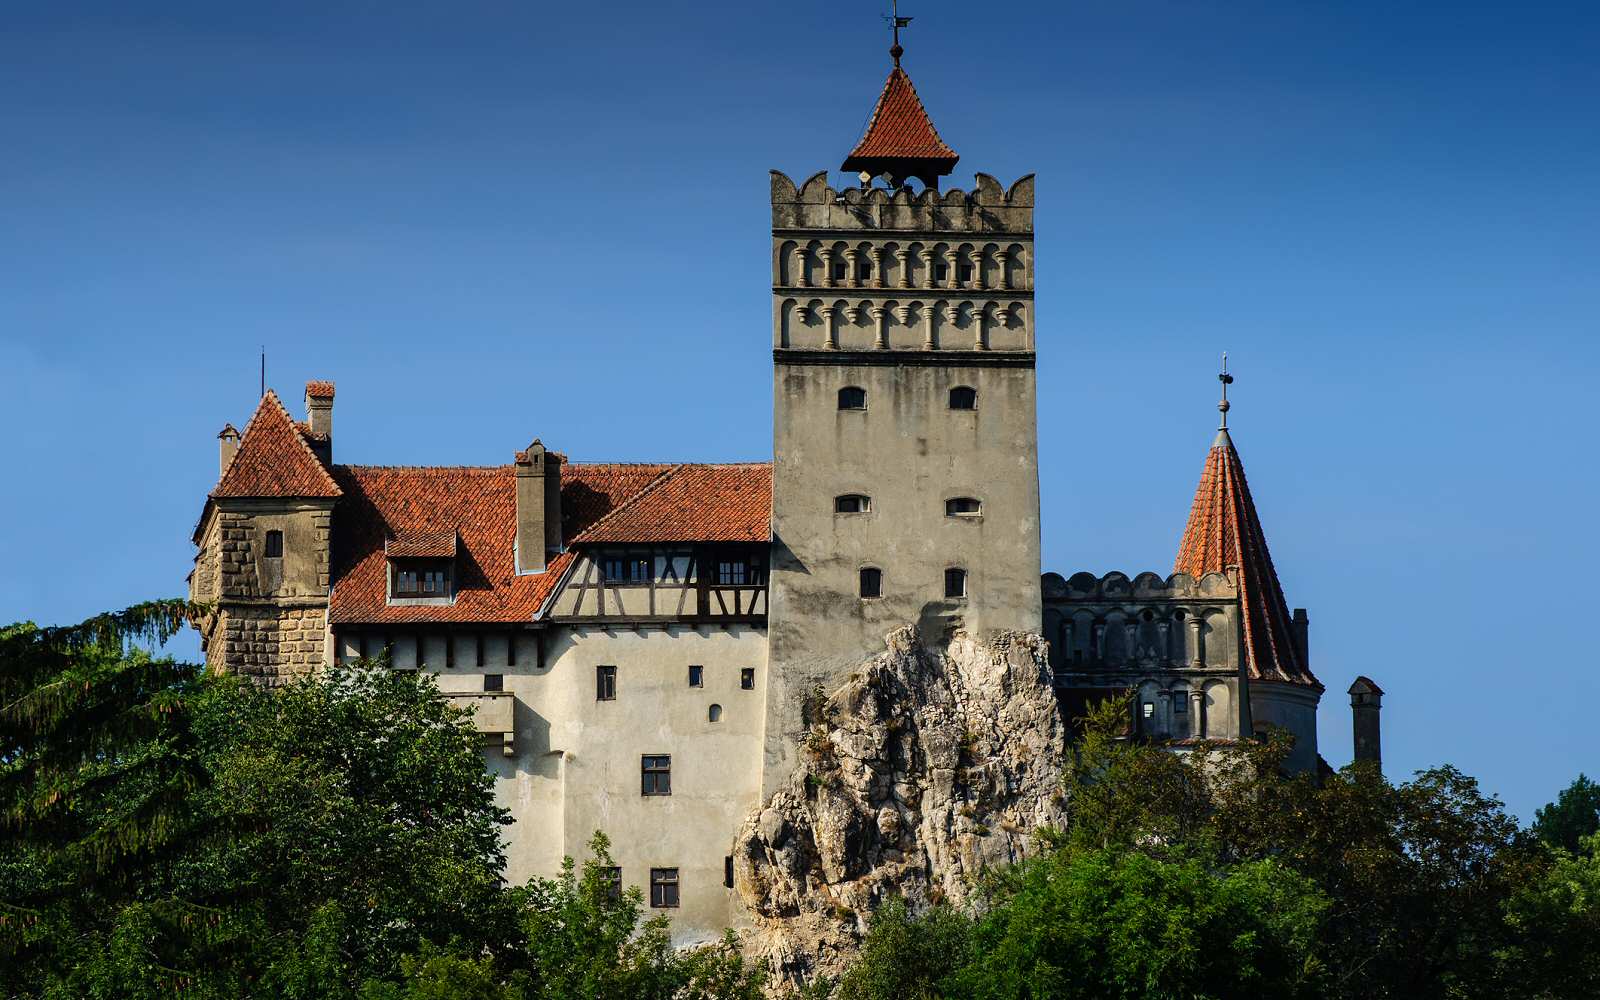 A photo with the front view of Bran Castle, Bran-Rucăr Pass, from the official website www.bran-castle.com